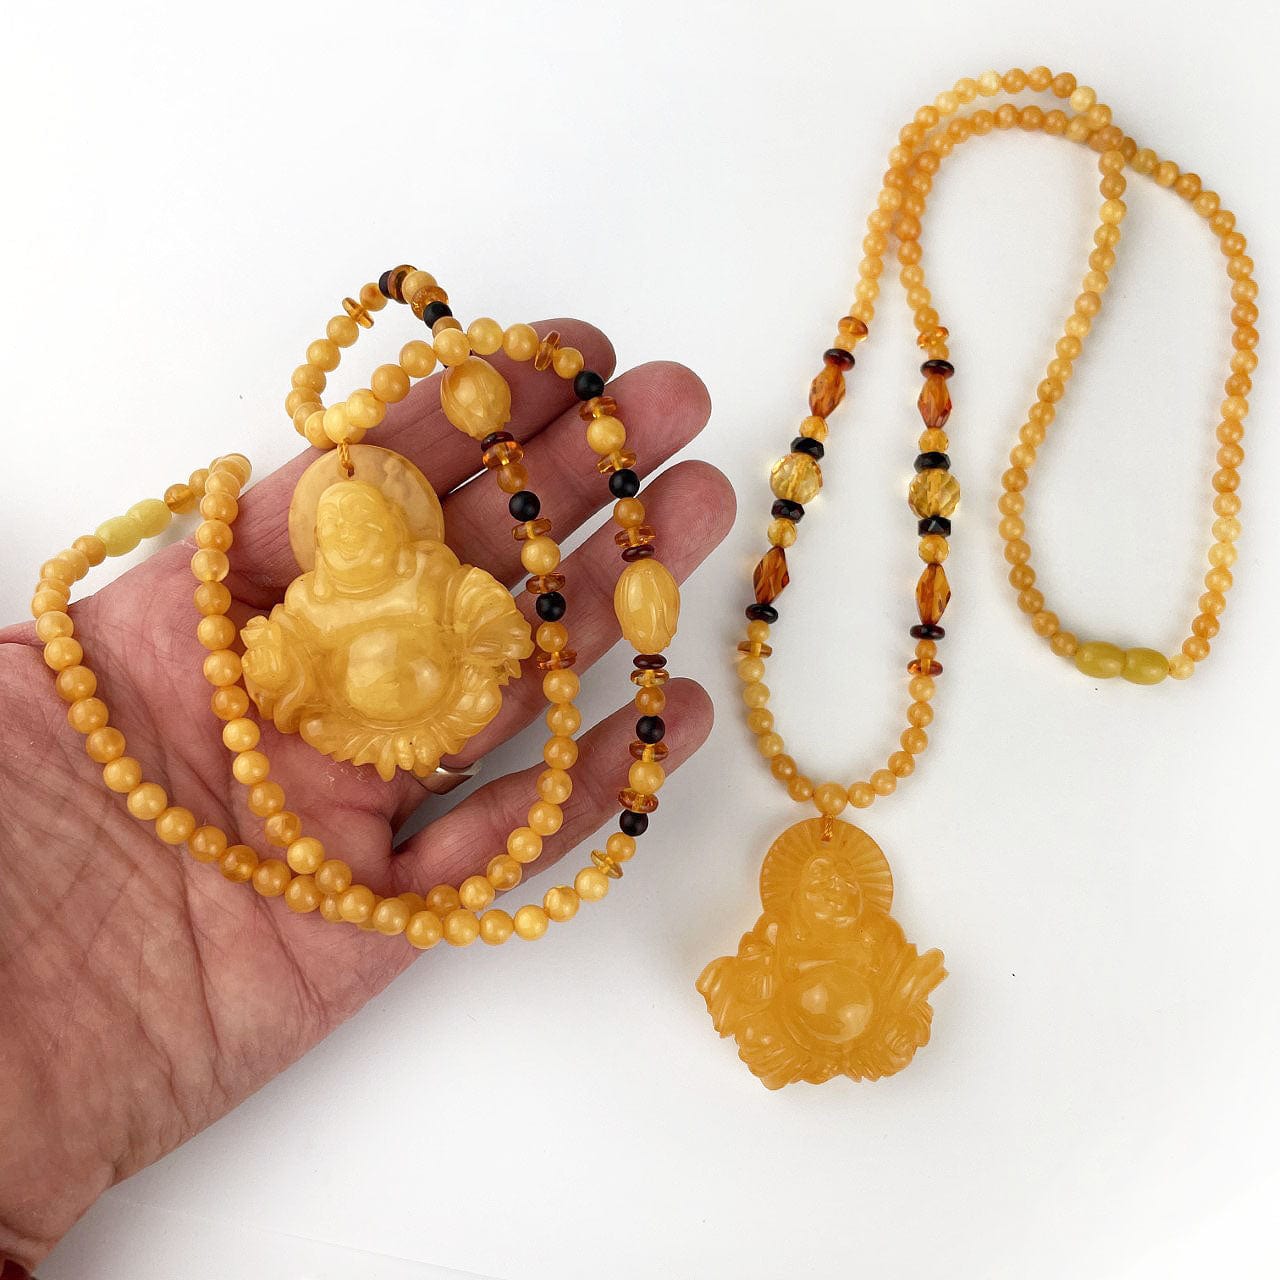 Amber Beaded Necklaces with Carved Buddha Pendants, shown here with one in a hand.